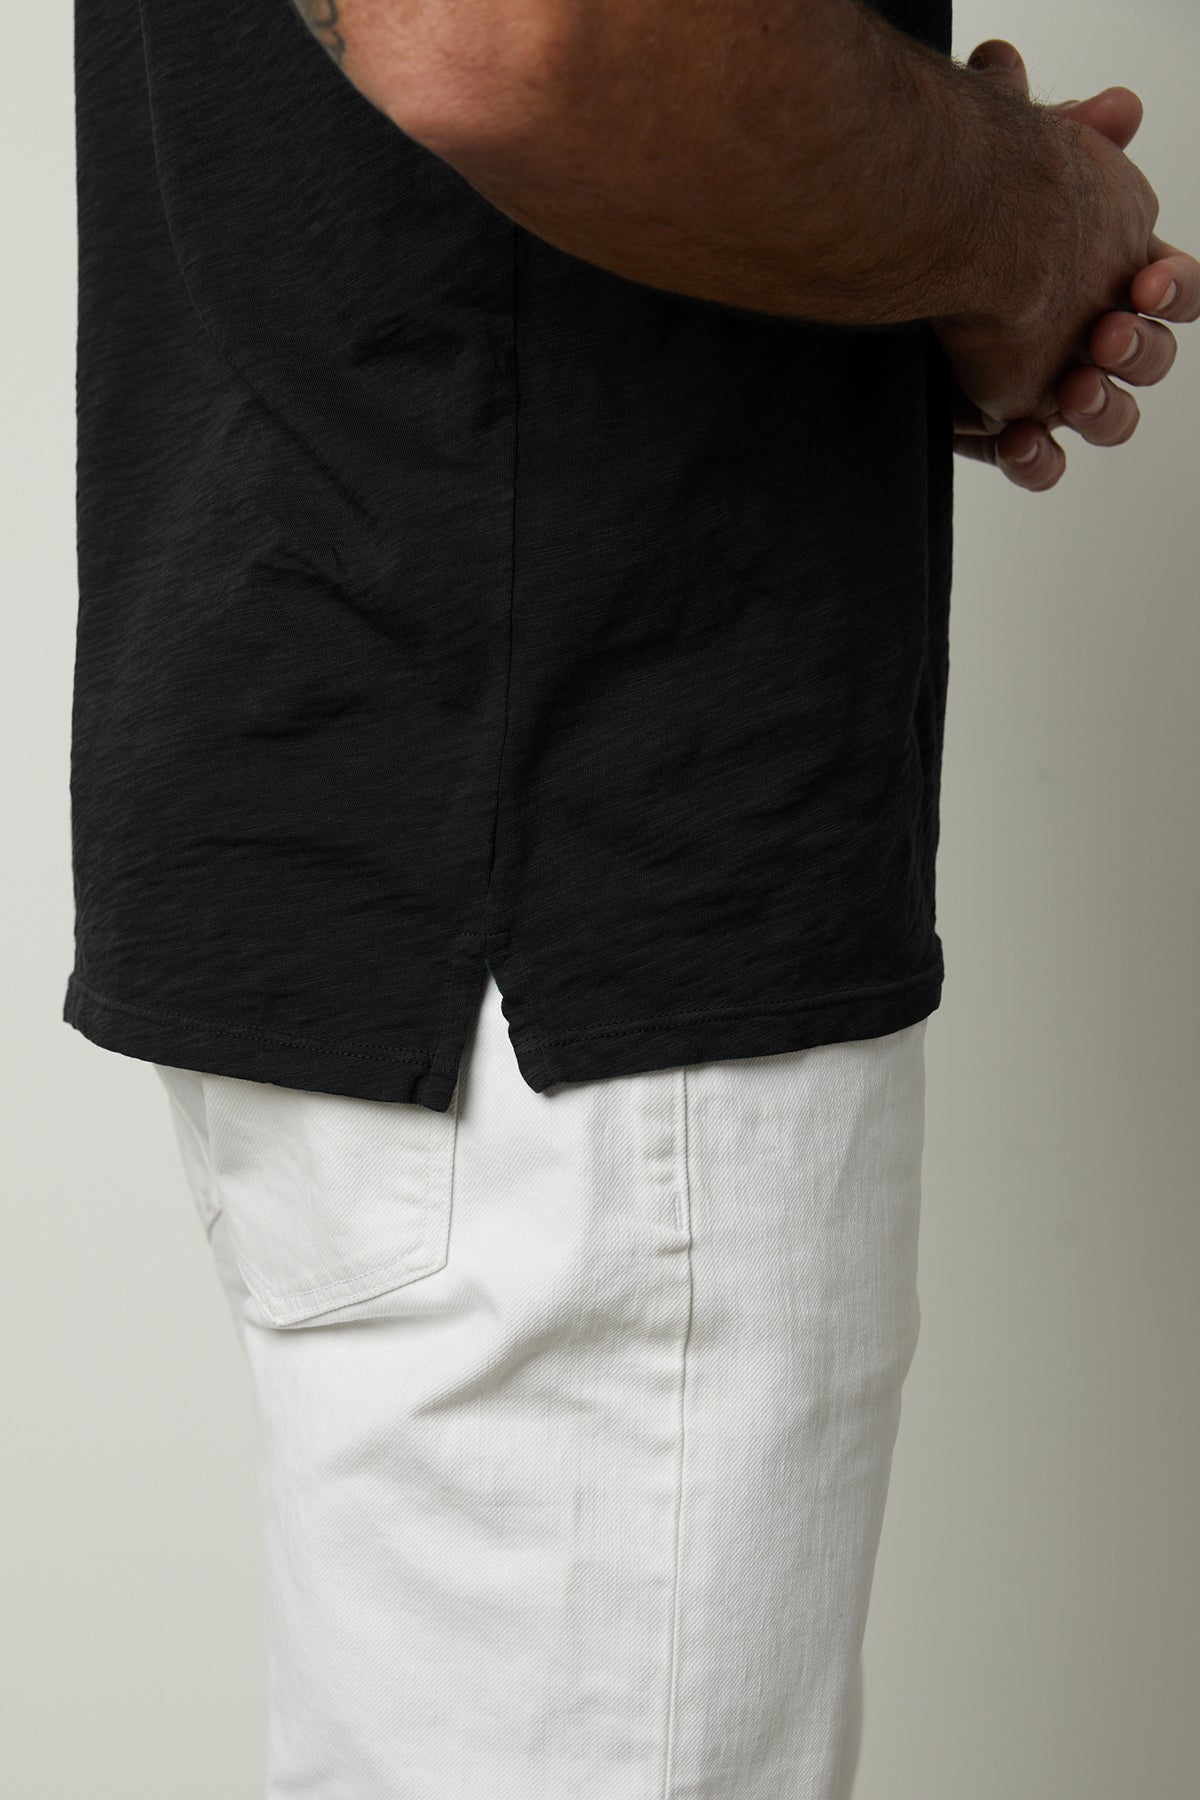 Niko Polo in black collared short sleeve shirt with white pants side split hem view-26612760805569